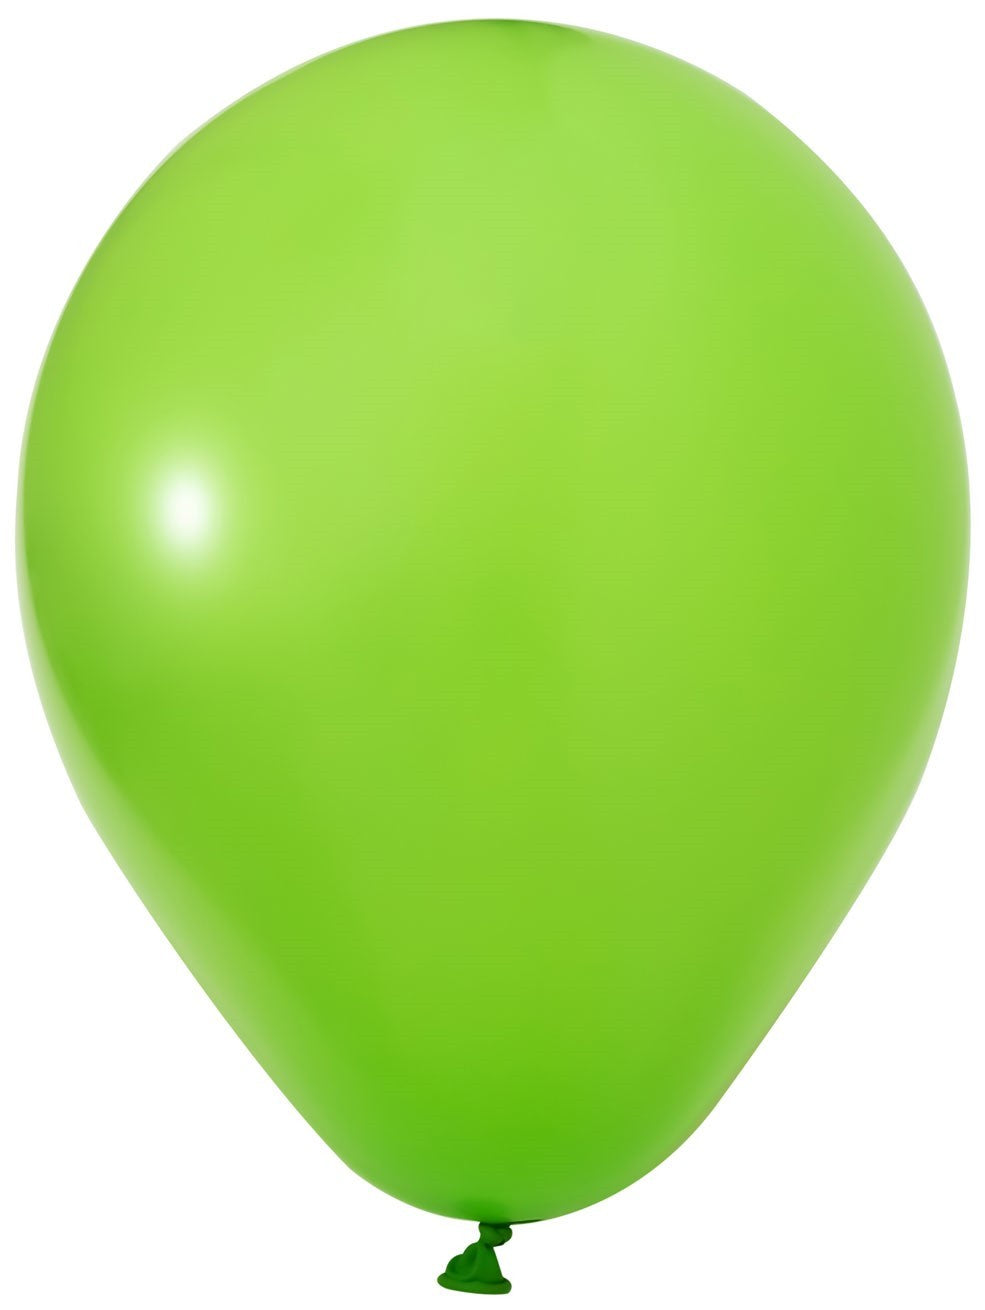 View Light Green Latex Balloon 12inch Pack of 100 information